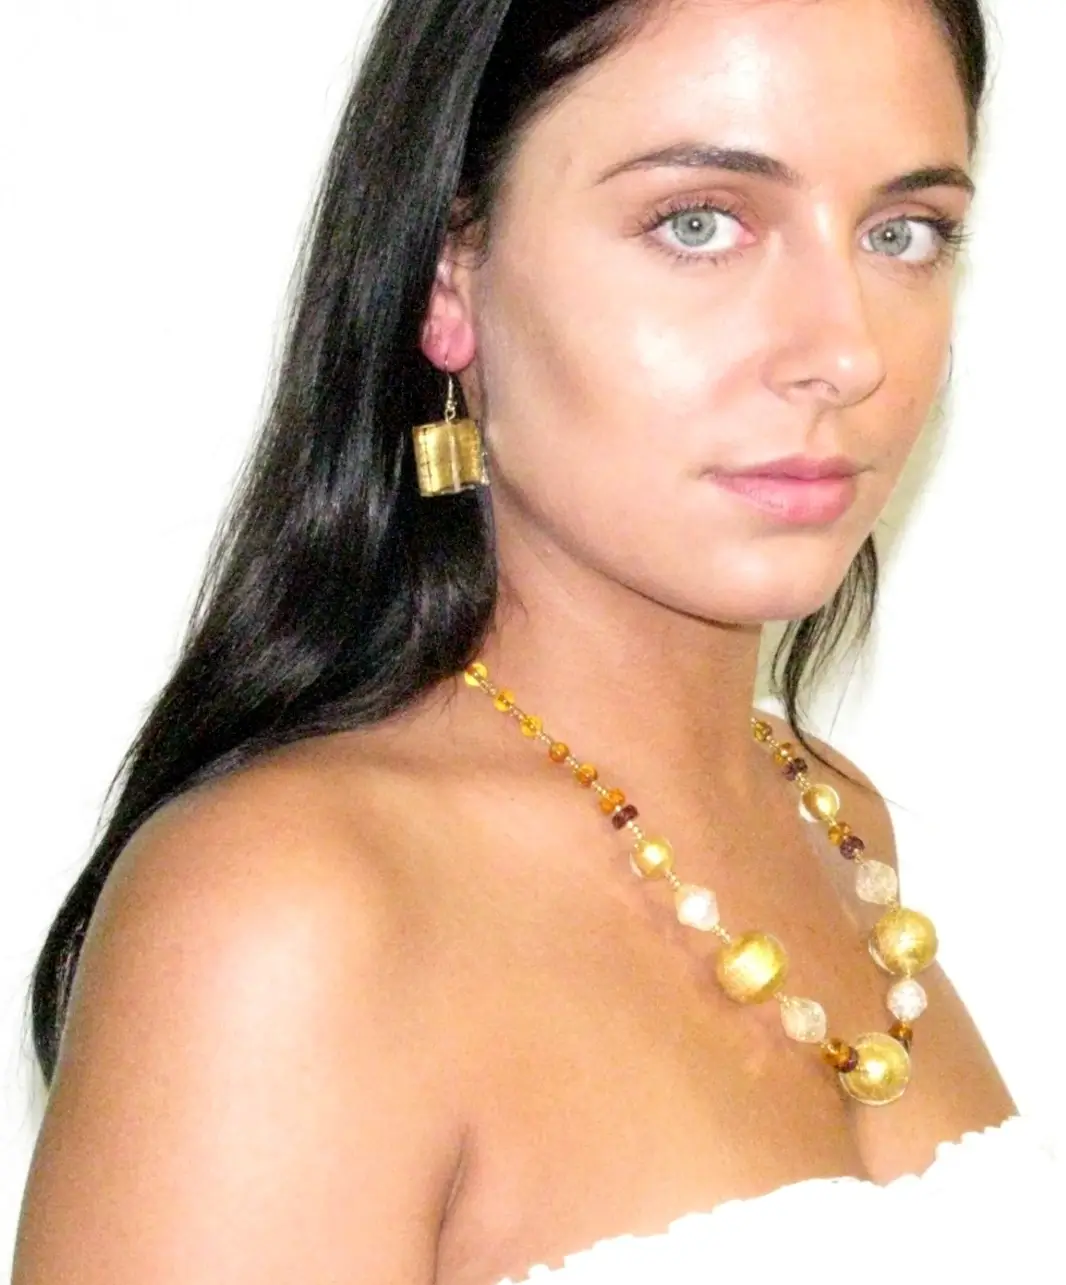 murano glass necklace worn on model